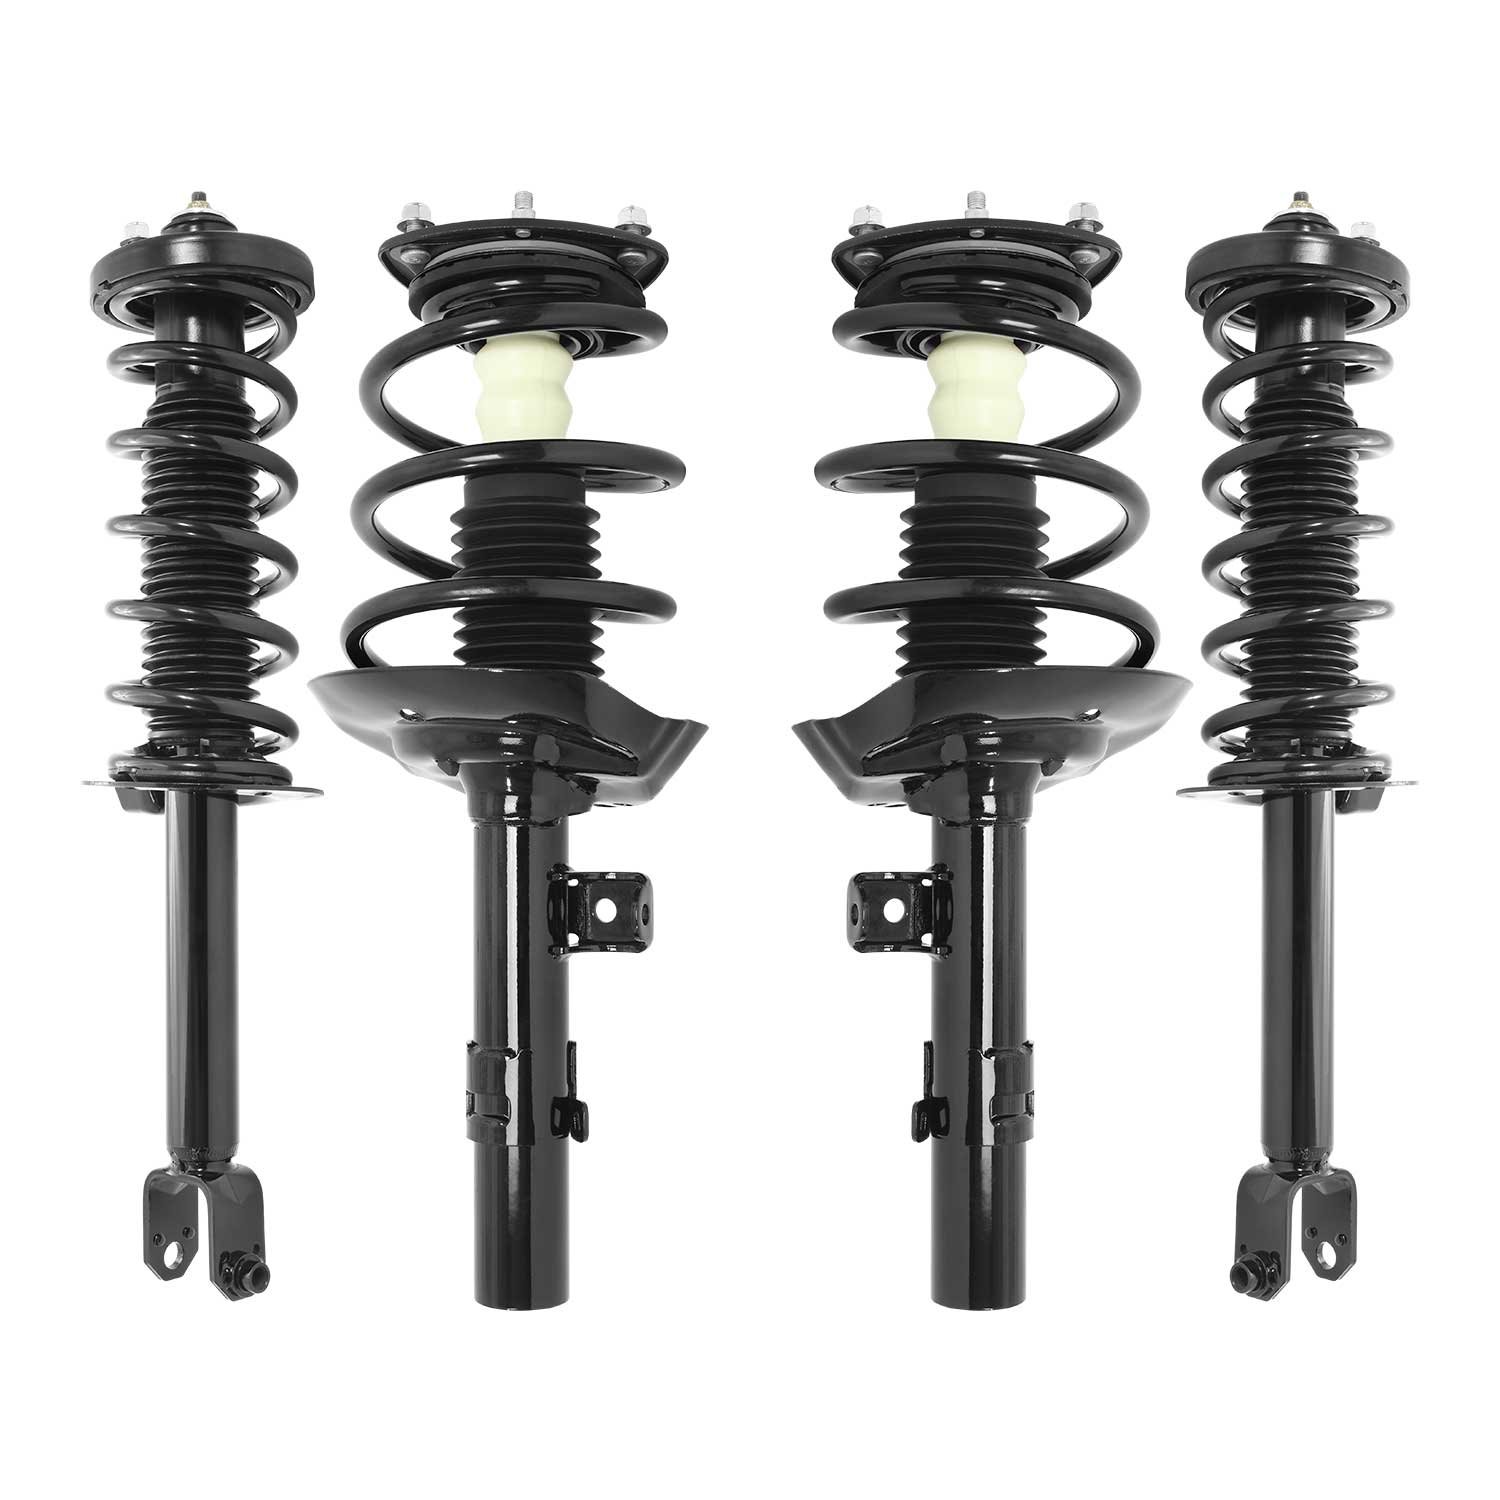 4-11215-15971-001 Front & Rear Suspension Strut & Coil Spring Assembly Kit Fits Select Honda Accord